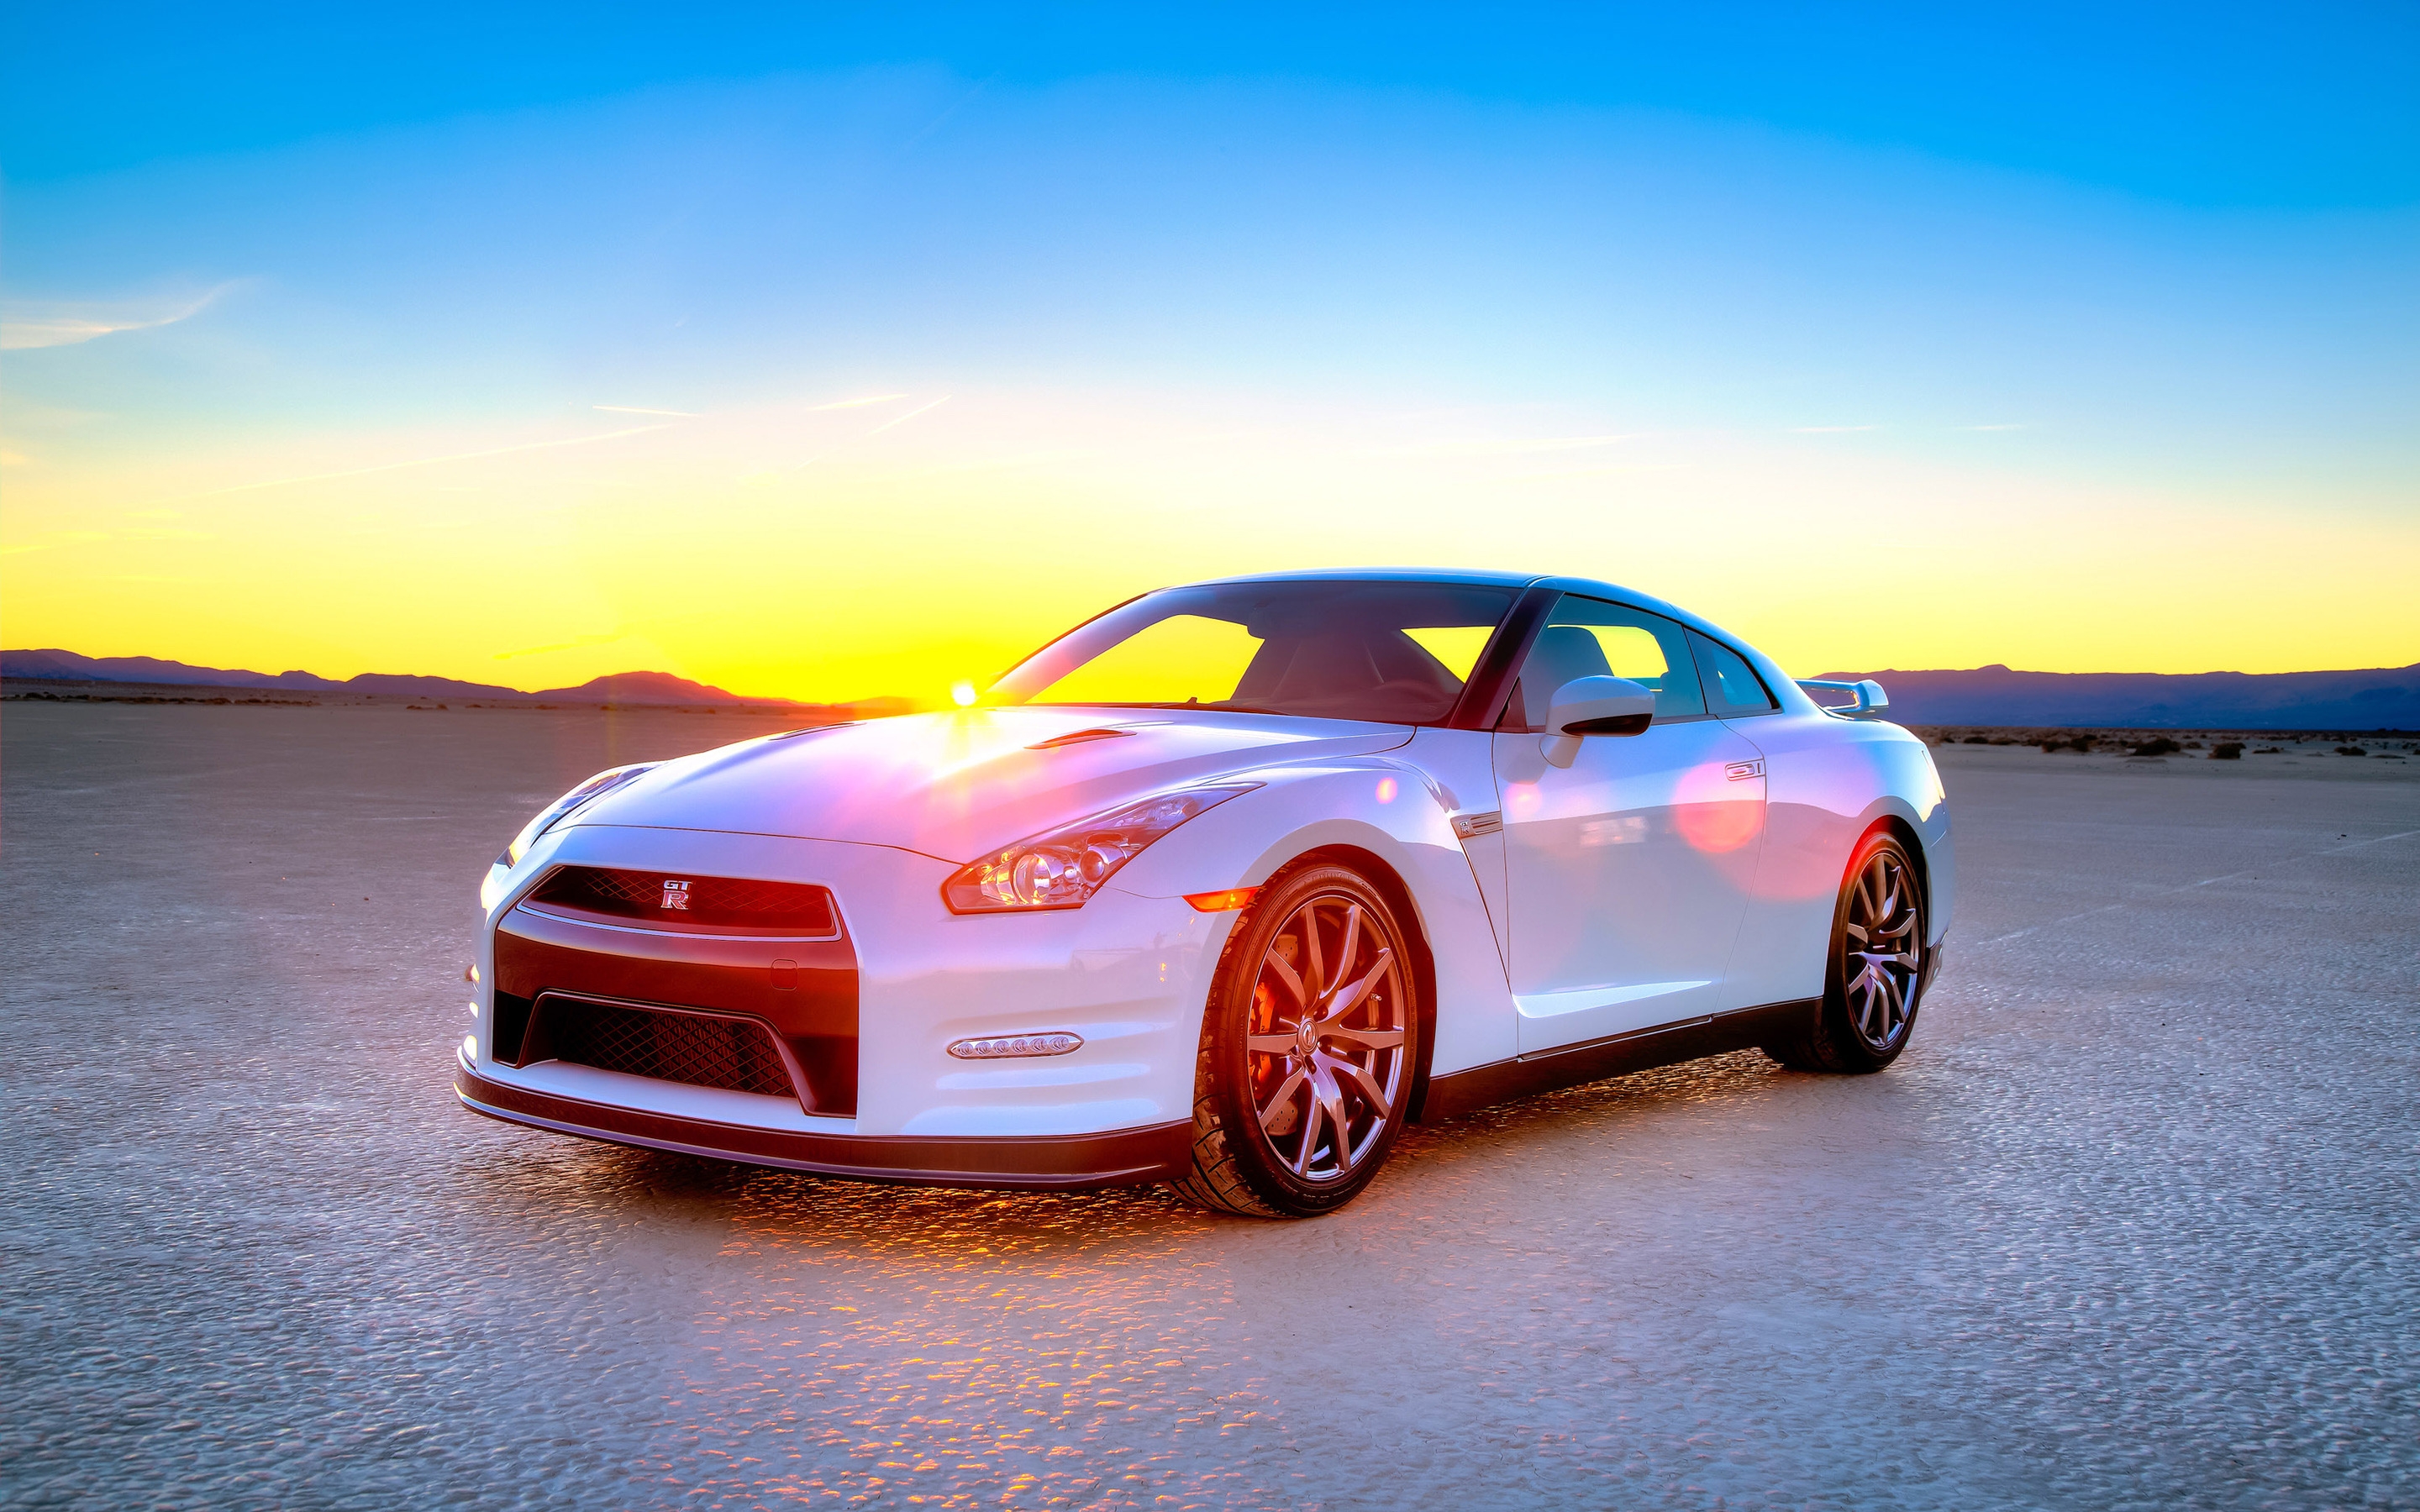 White Nissan GT-R 2014 Edition for 2880 x 1800 Retina Display resolution